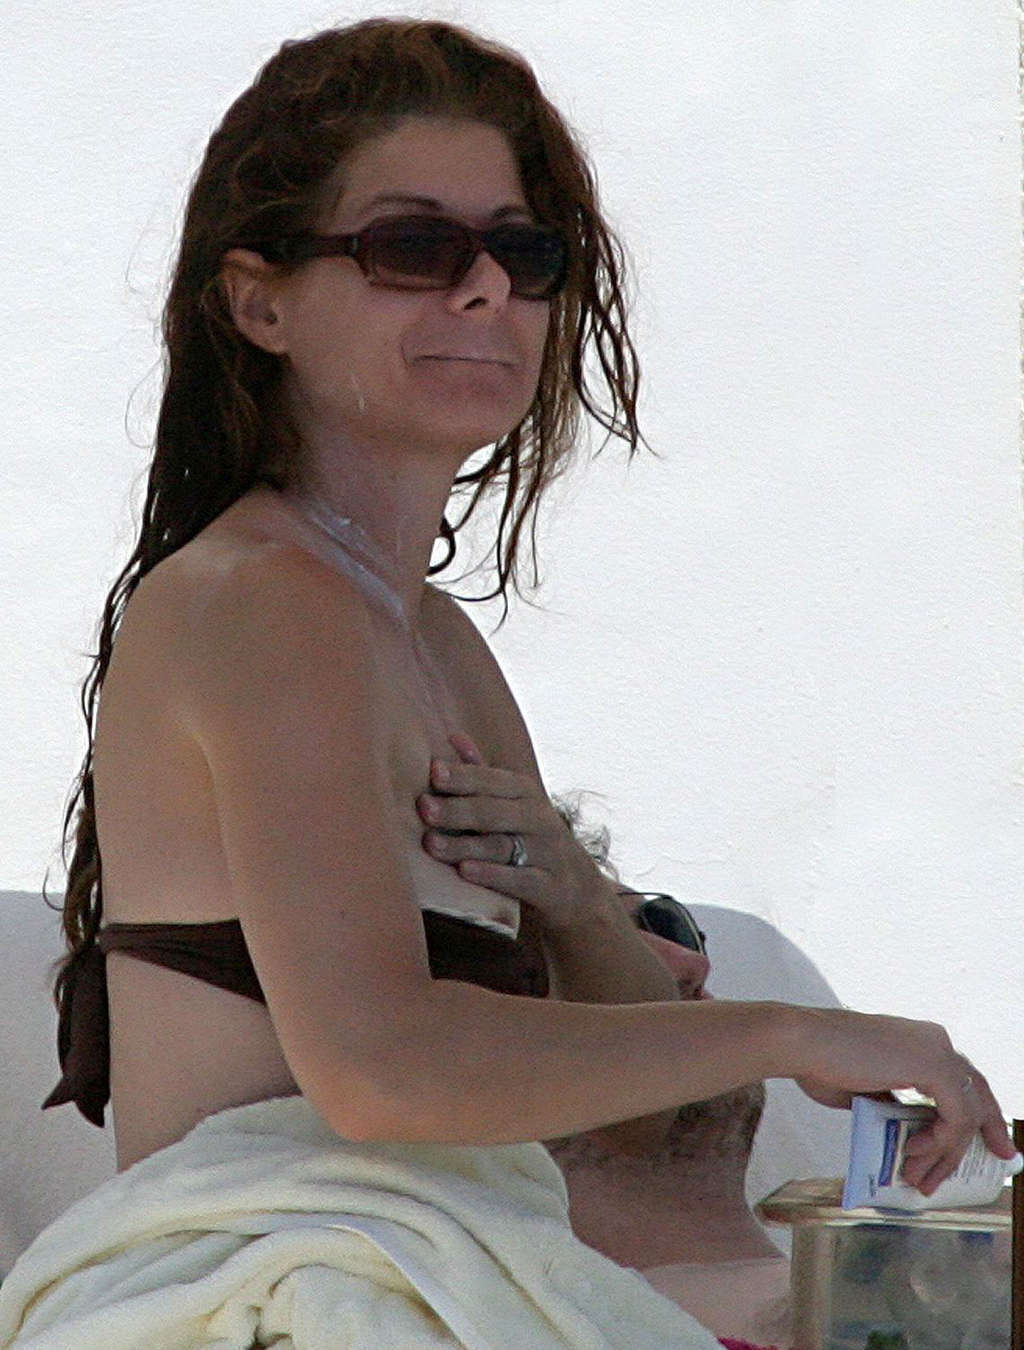 Debra Messing nipple slip on beach paparazzi pictures and posing nude #75372268